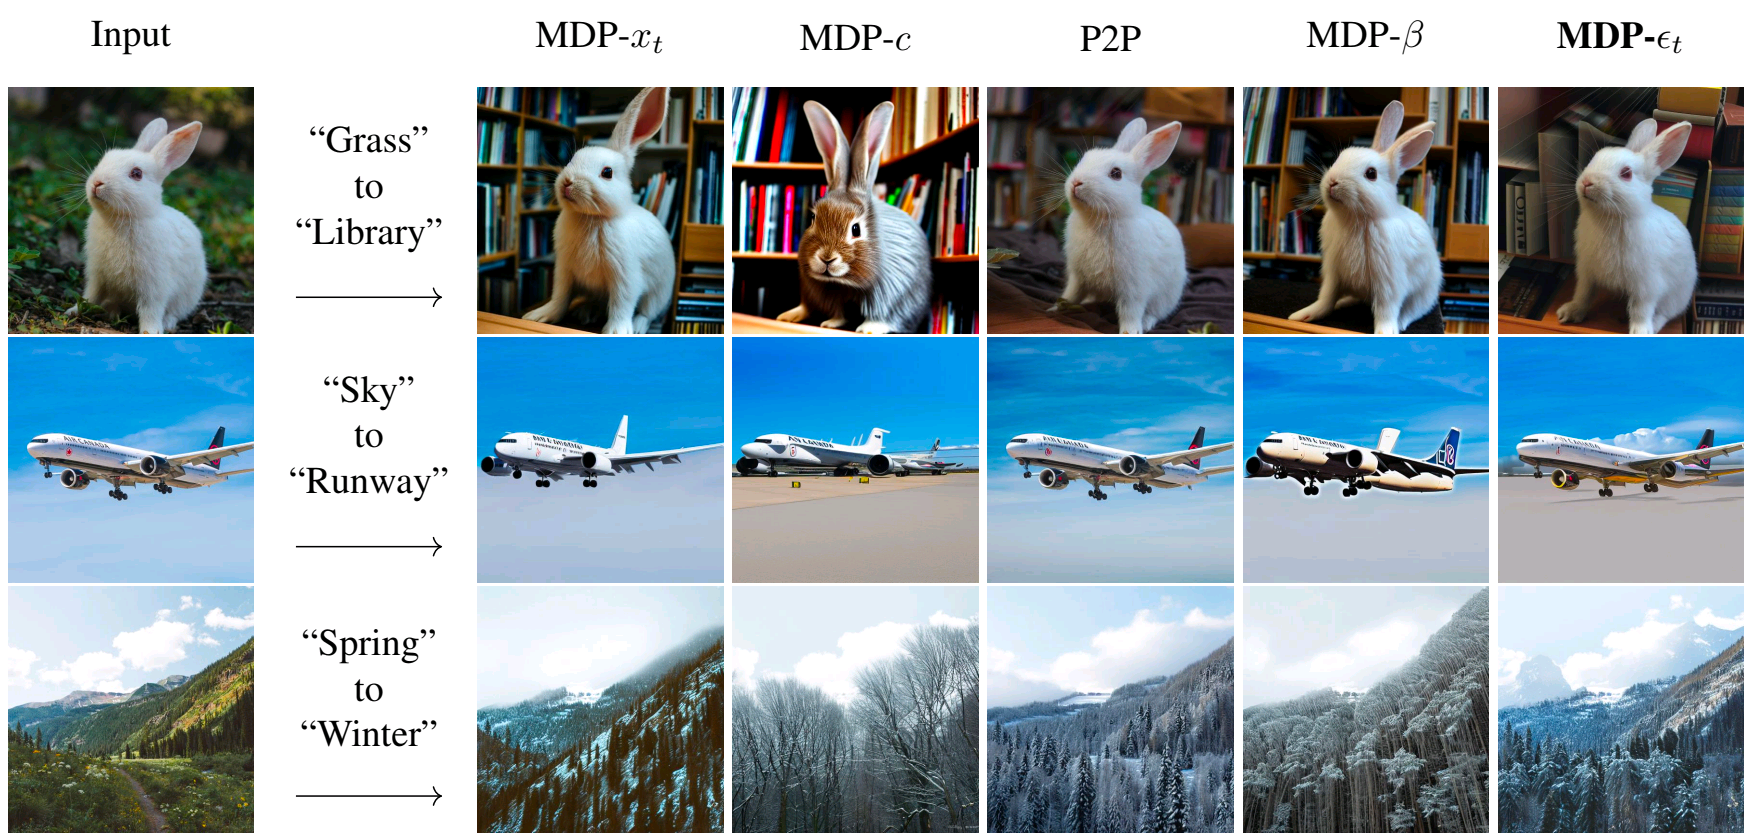 MDP: Text-guided Image Editing by Manipulating Diffusion Path